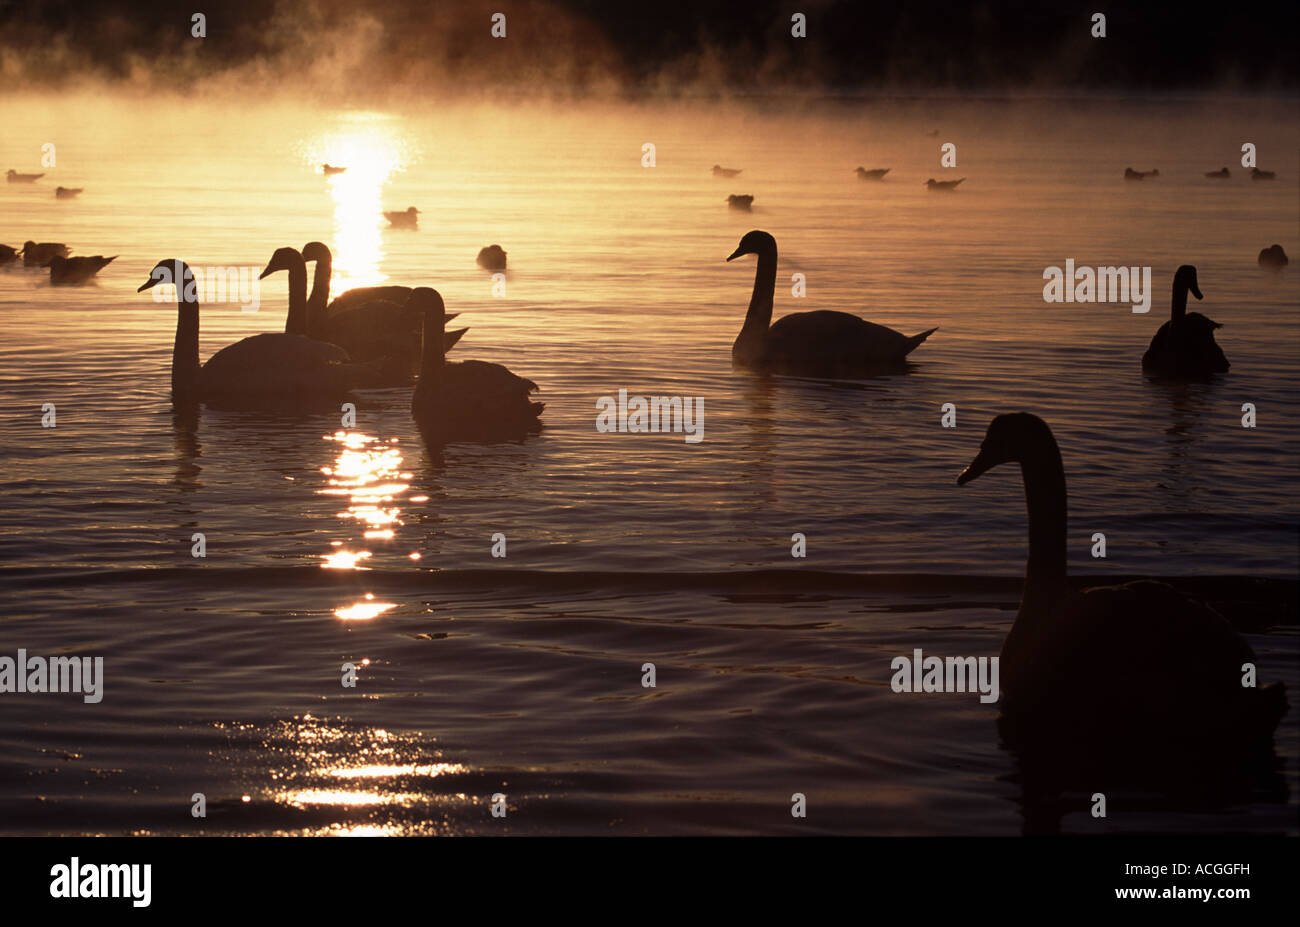 Mute swans and seagulls in frost and mist at Jeløy, Moss kommune, Østfold fylke, Norway. Stock Photo